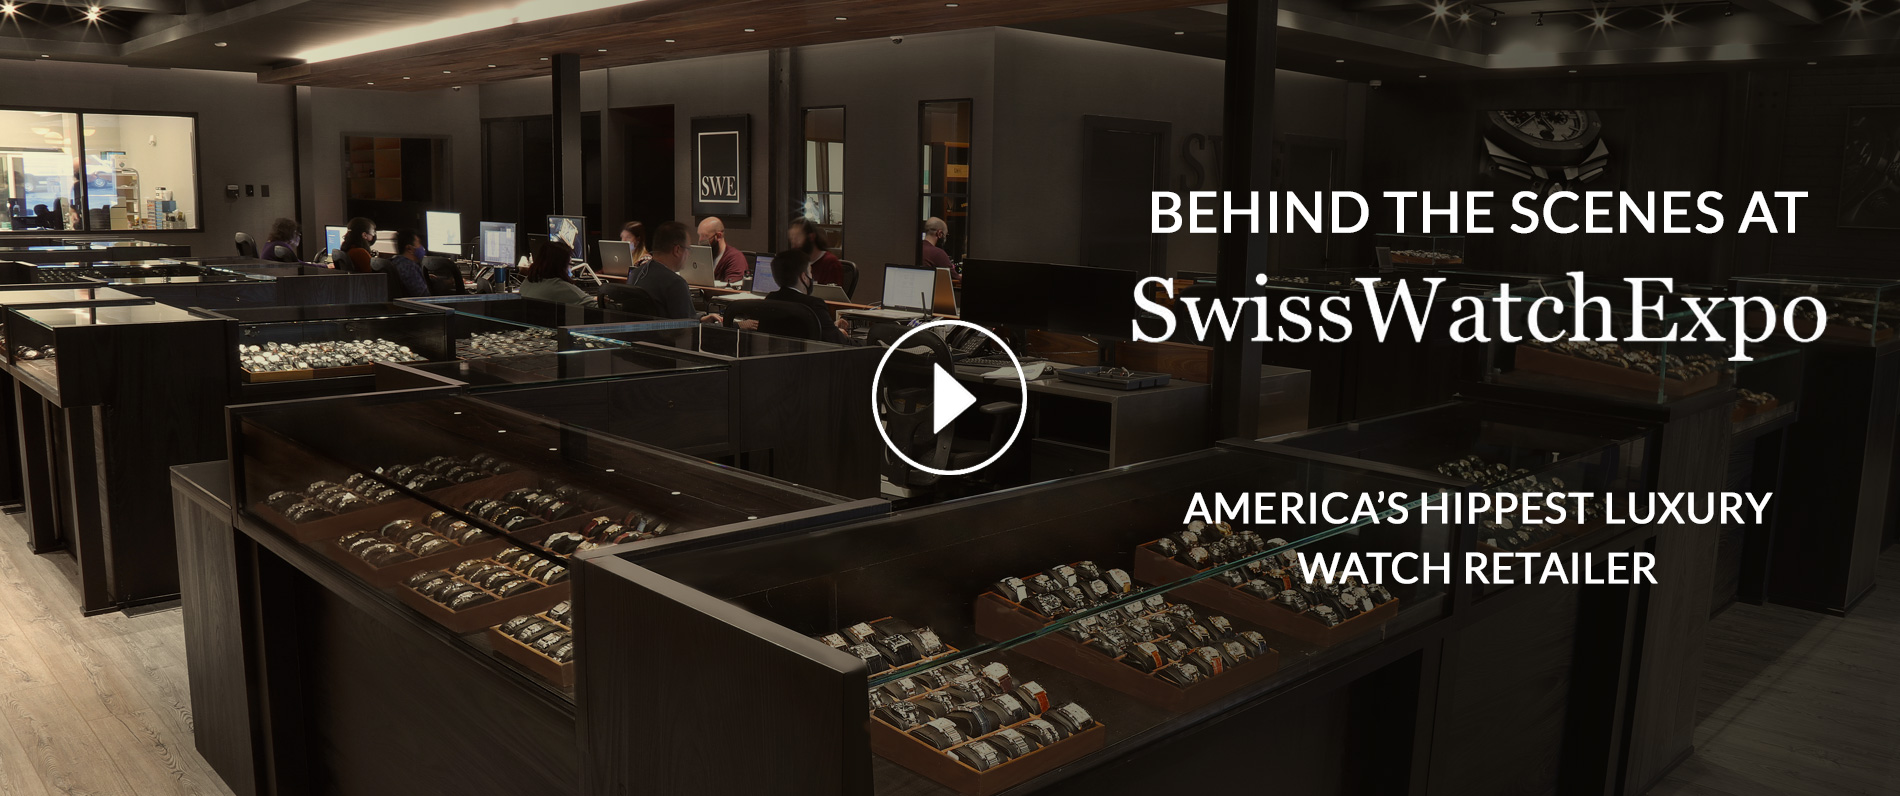 Swiss Watch Expo.com: How This Pre-Owned Luxury Watch Company